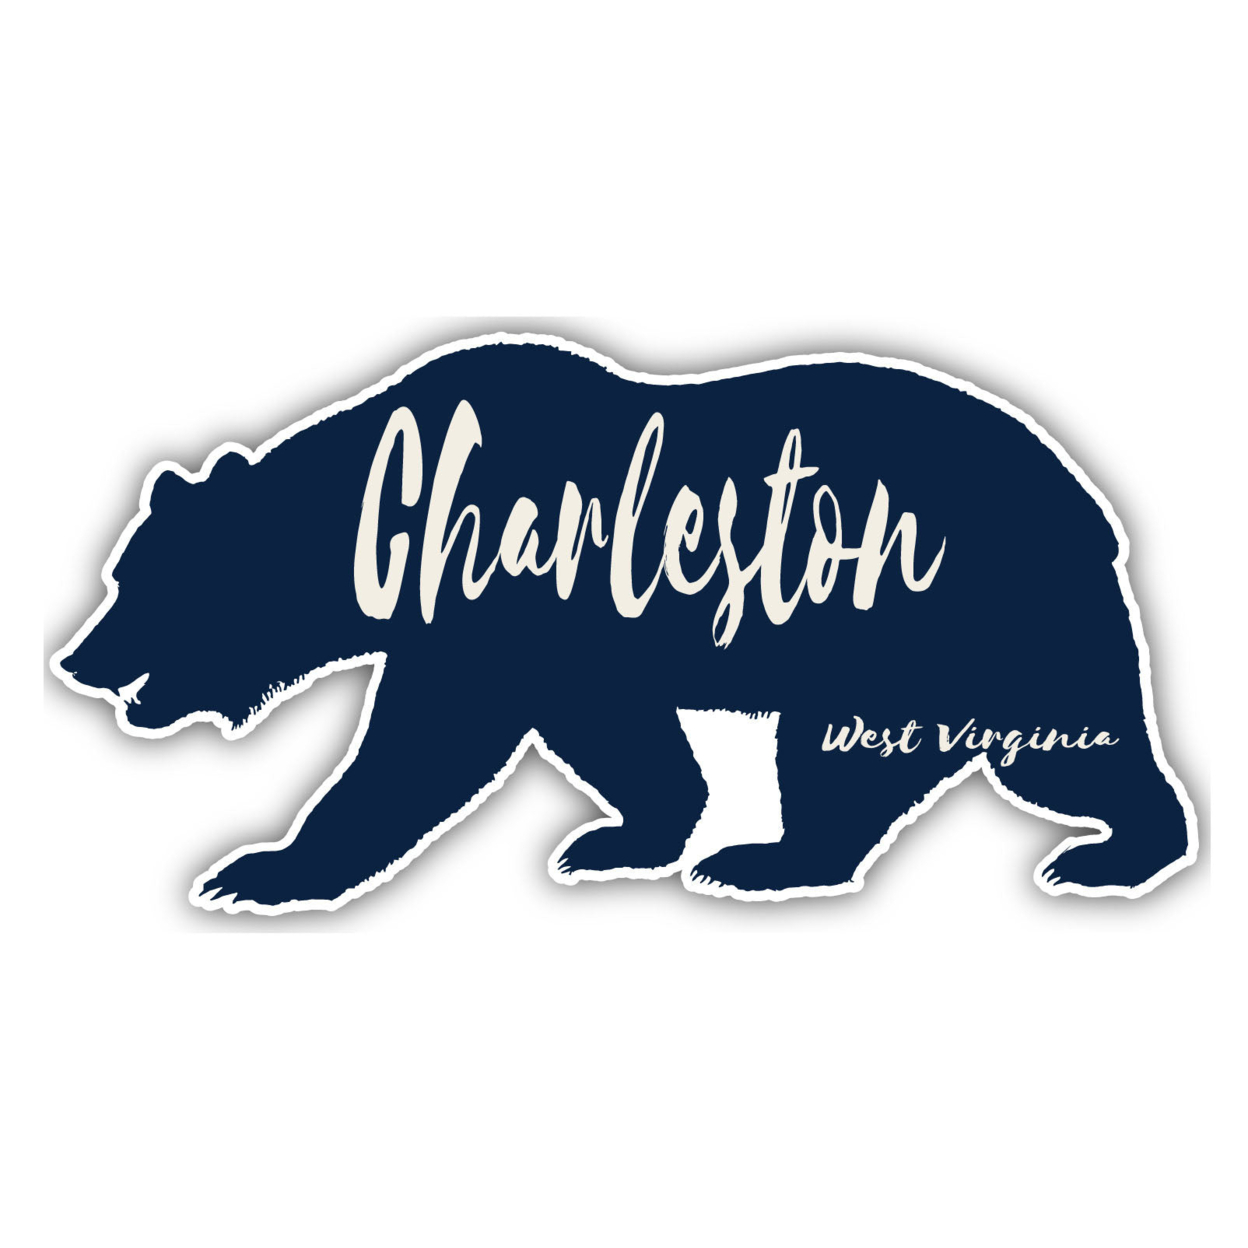 Charleston West Virginia Souvenir Decorative Stickers (Choose Theme And Size) - 4-Pack, 8-Inch, Bear